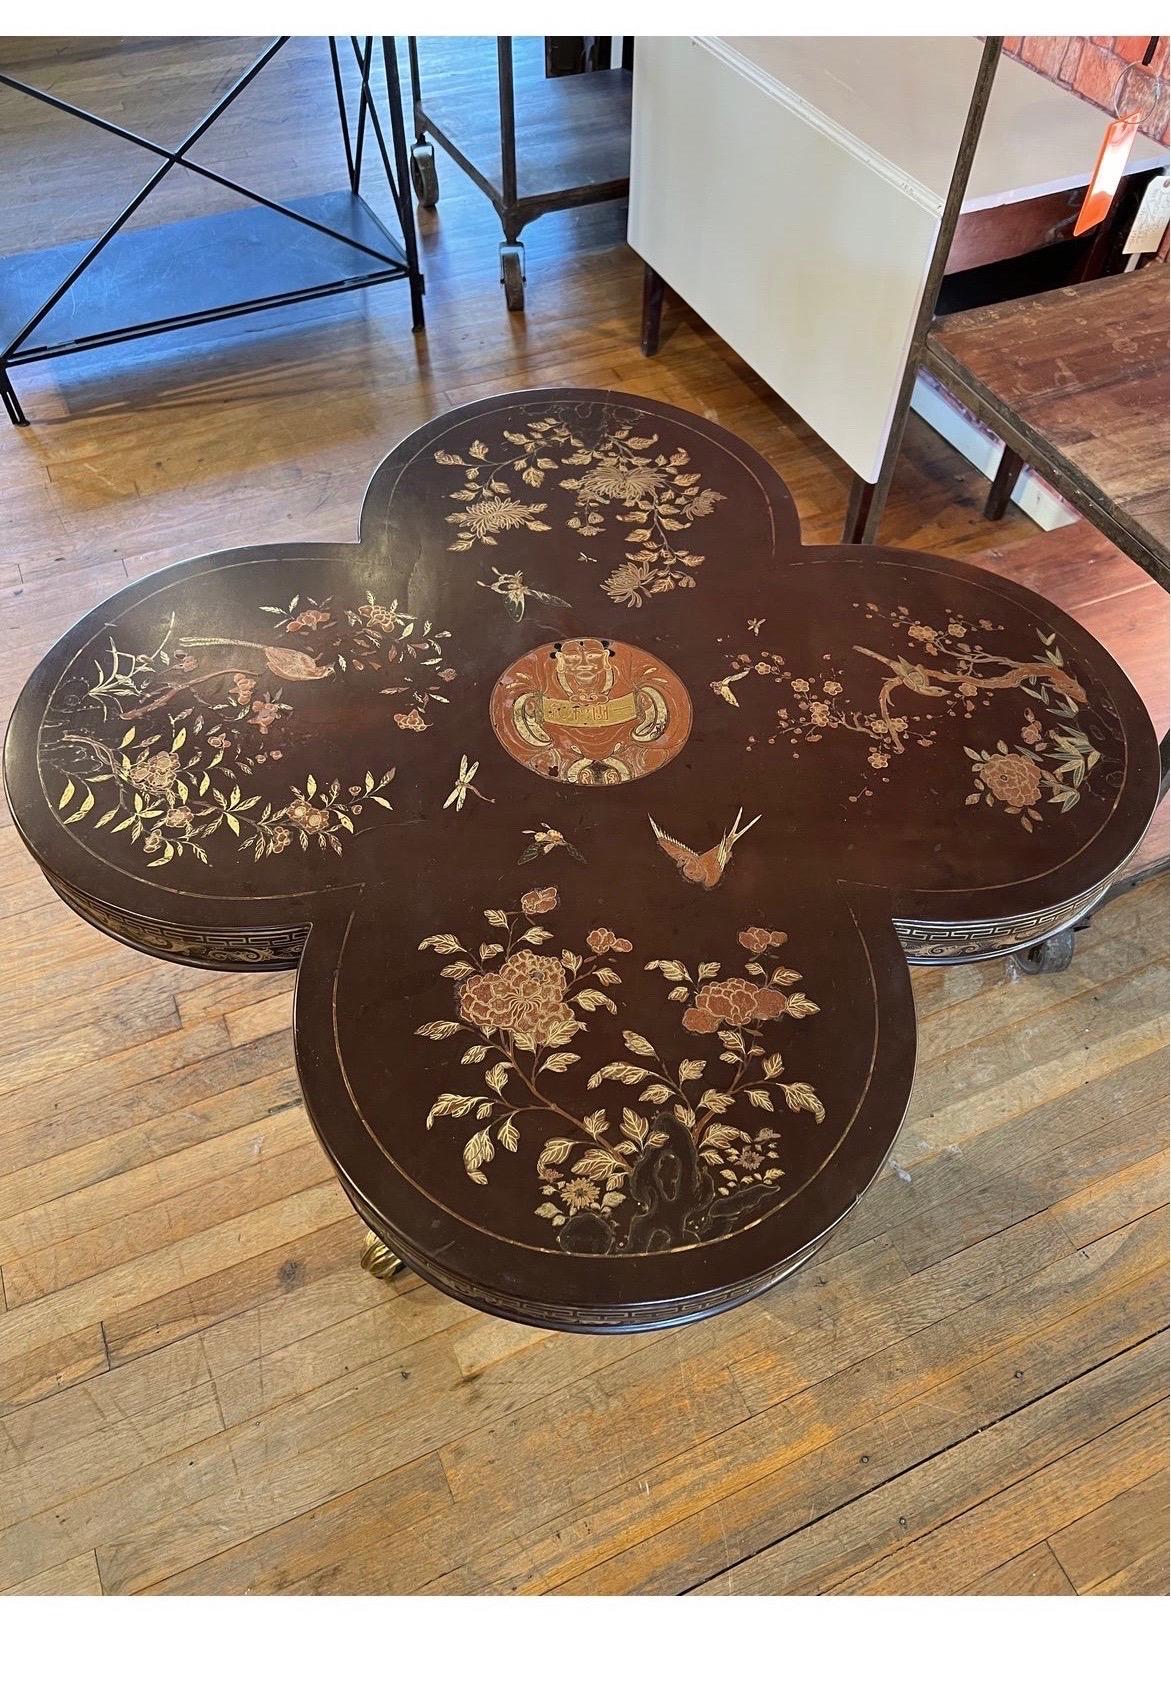 Stunning 4-leaf clover designed top with chinoiserie lacquer decoration, birds and floral to top and resting on a parcel gilt and ebonzied center table.
Very spectacular and rare form with fine decoration.